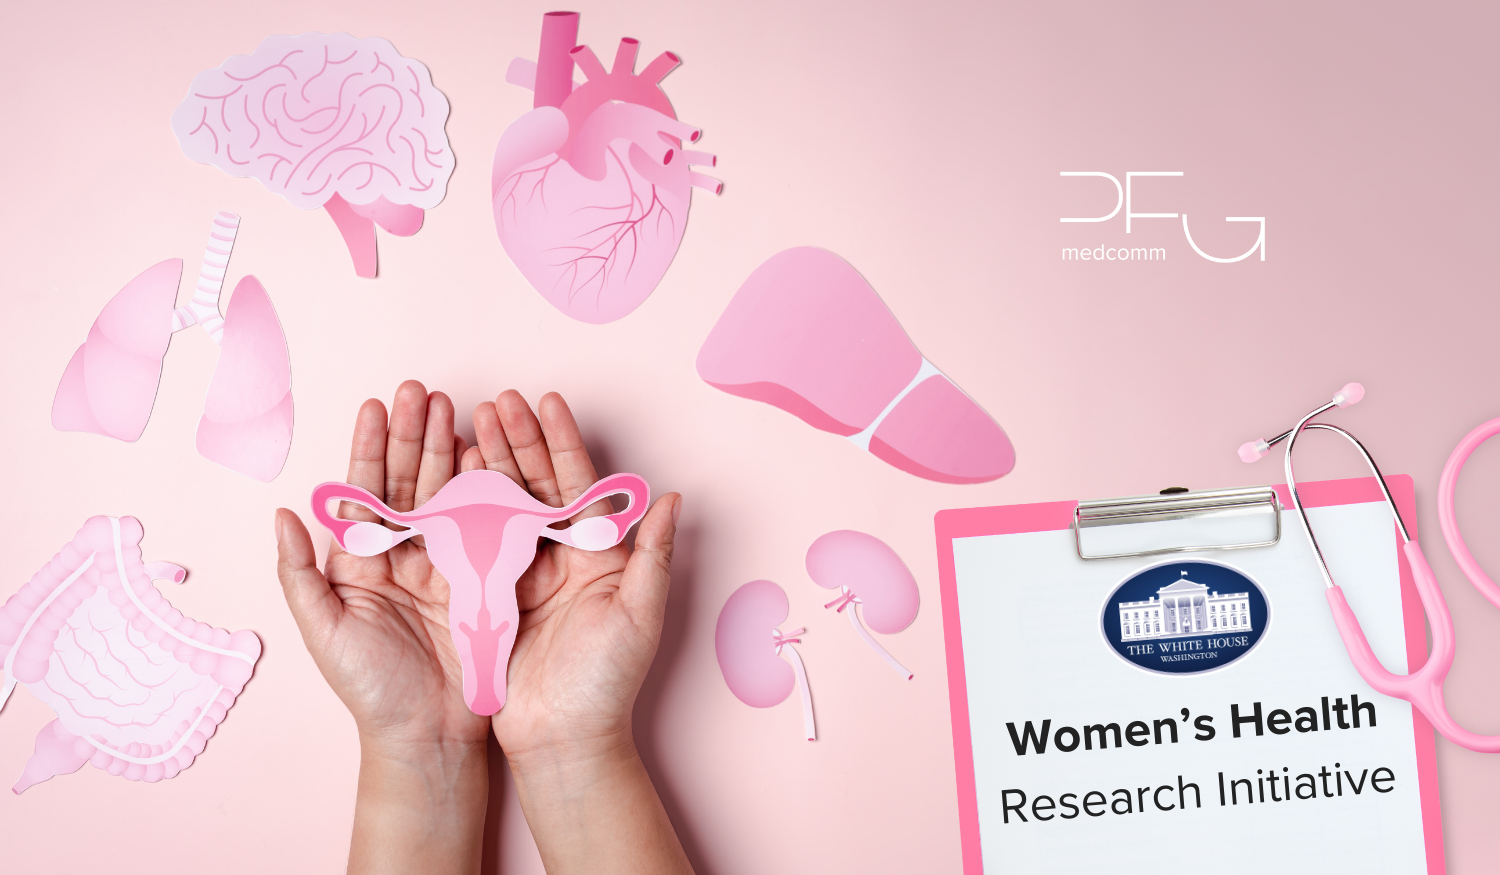 White House Initiative on Women’s Health Research